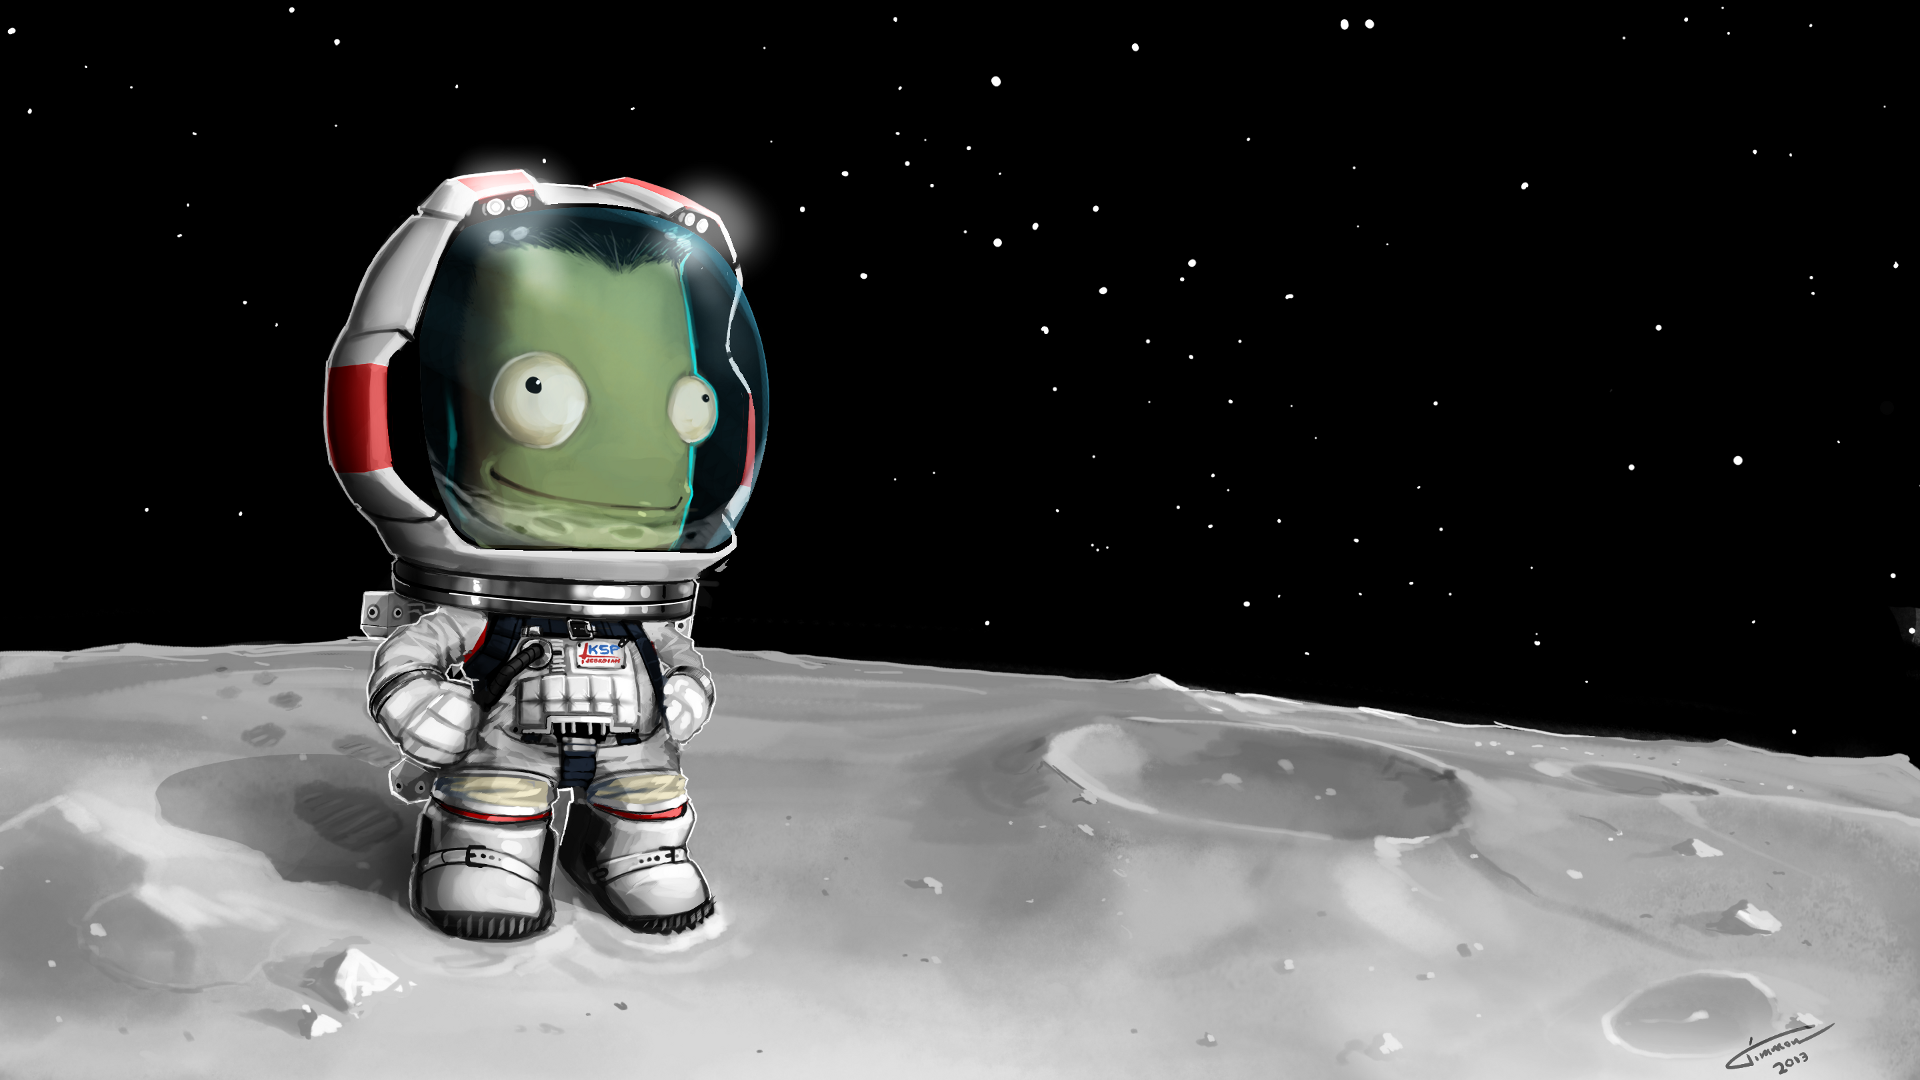 kerbal_space_program_desktop_by_timmon26-d66qqlw.png